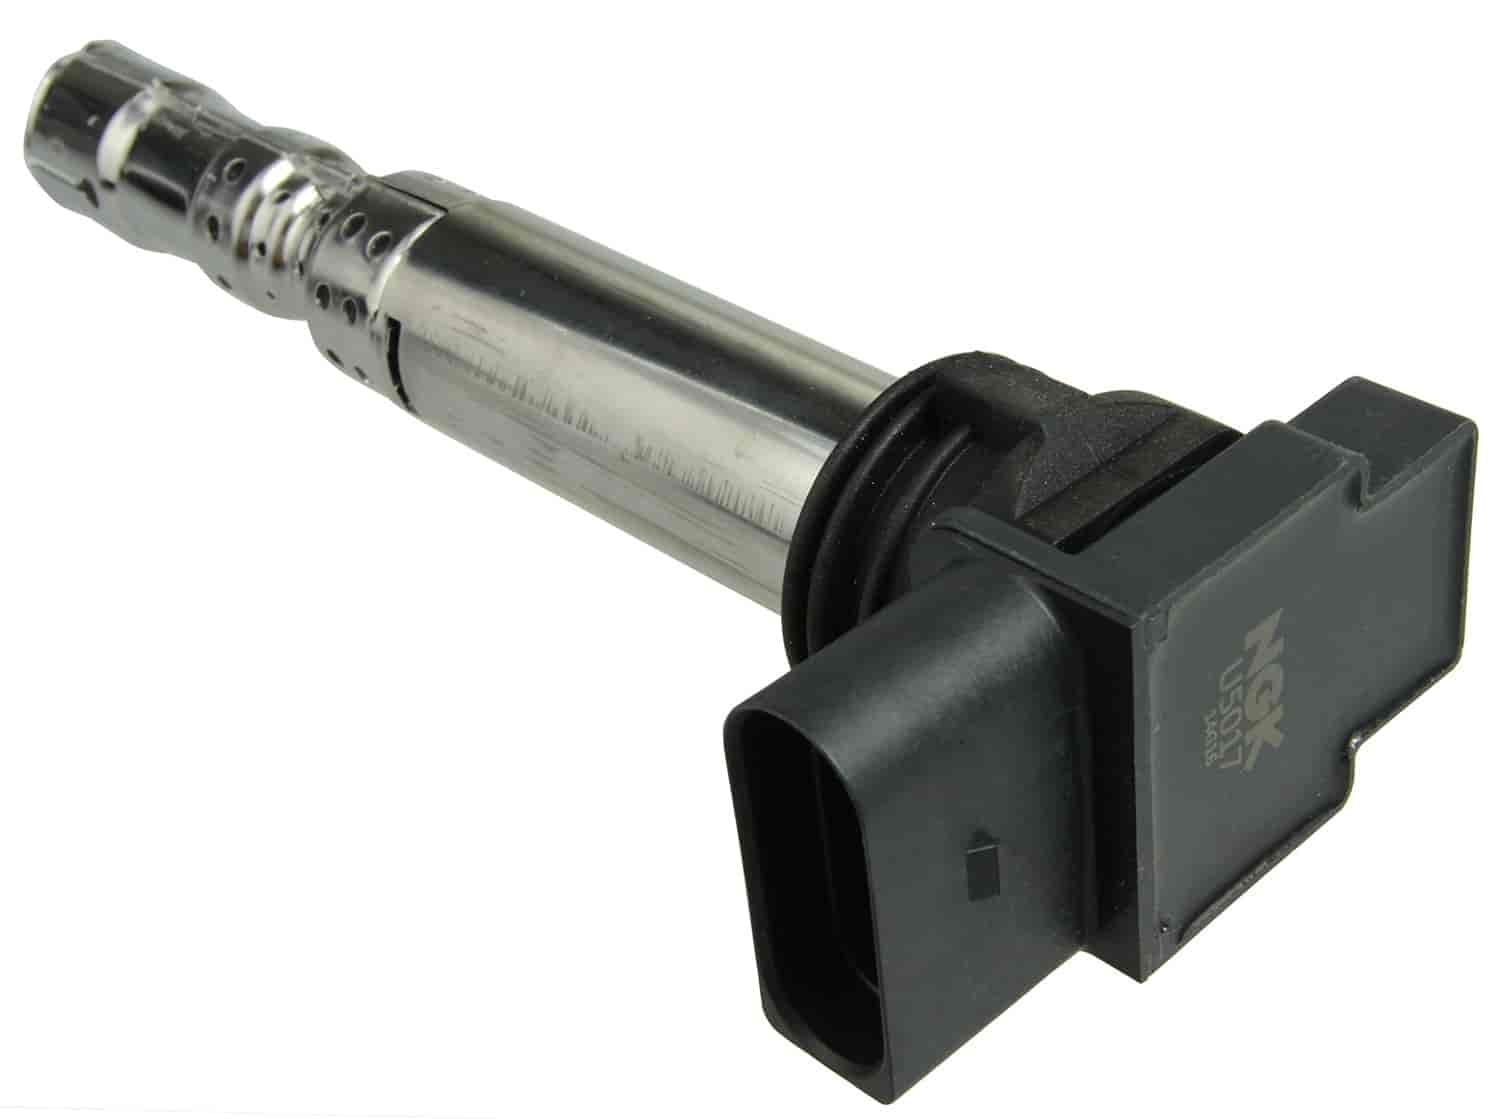 Coil-on-Plug Pencil-Type Ignition Coil